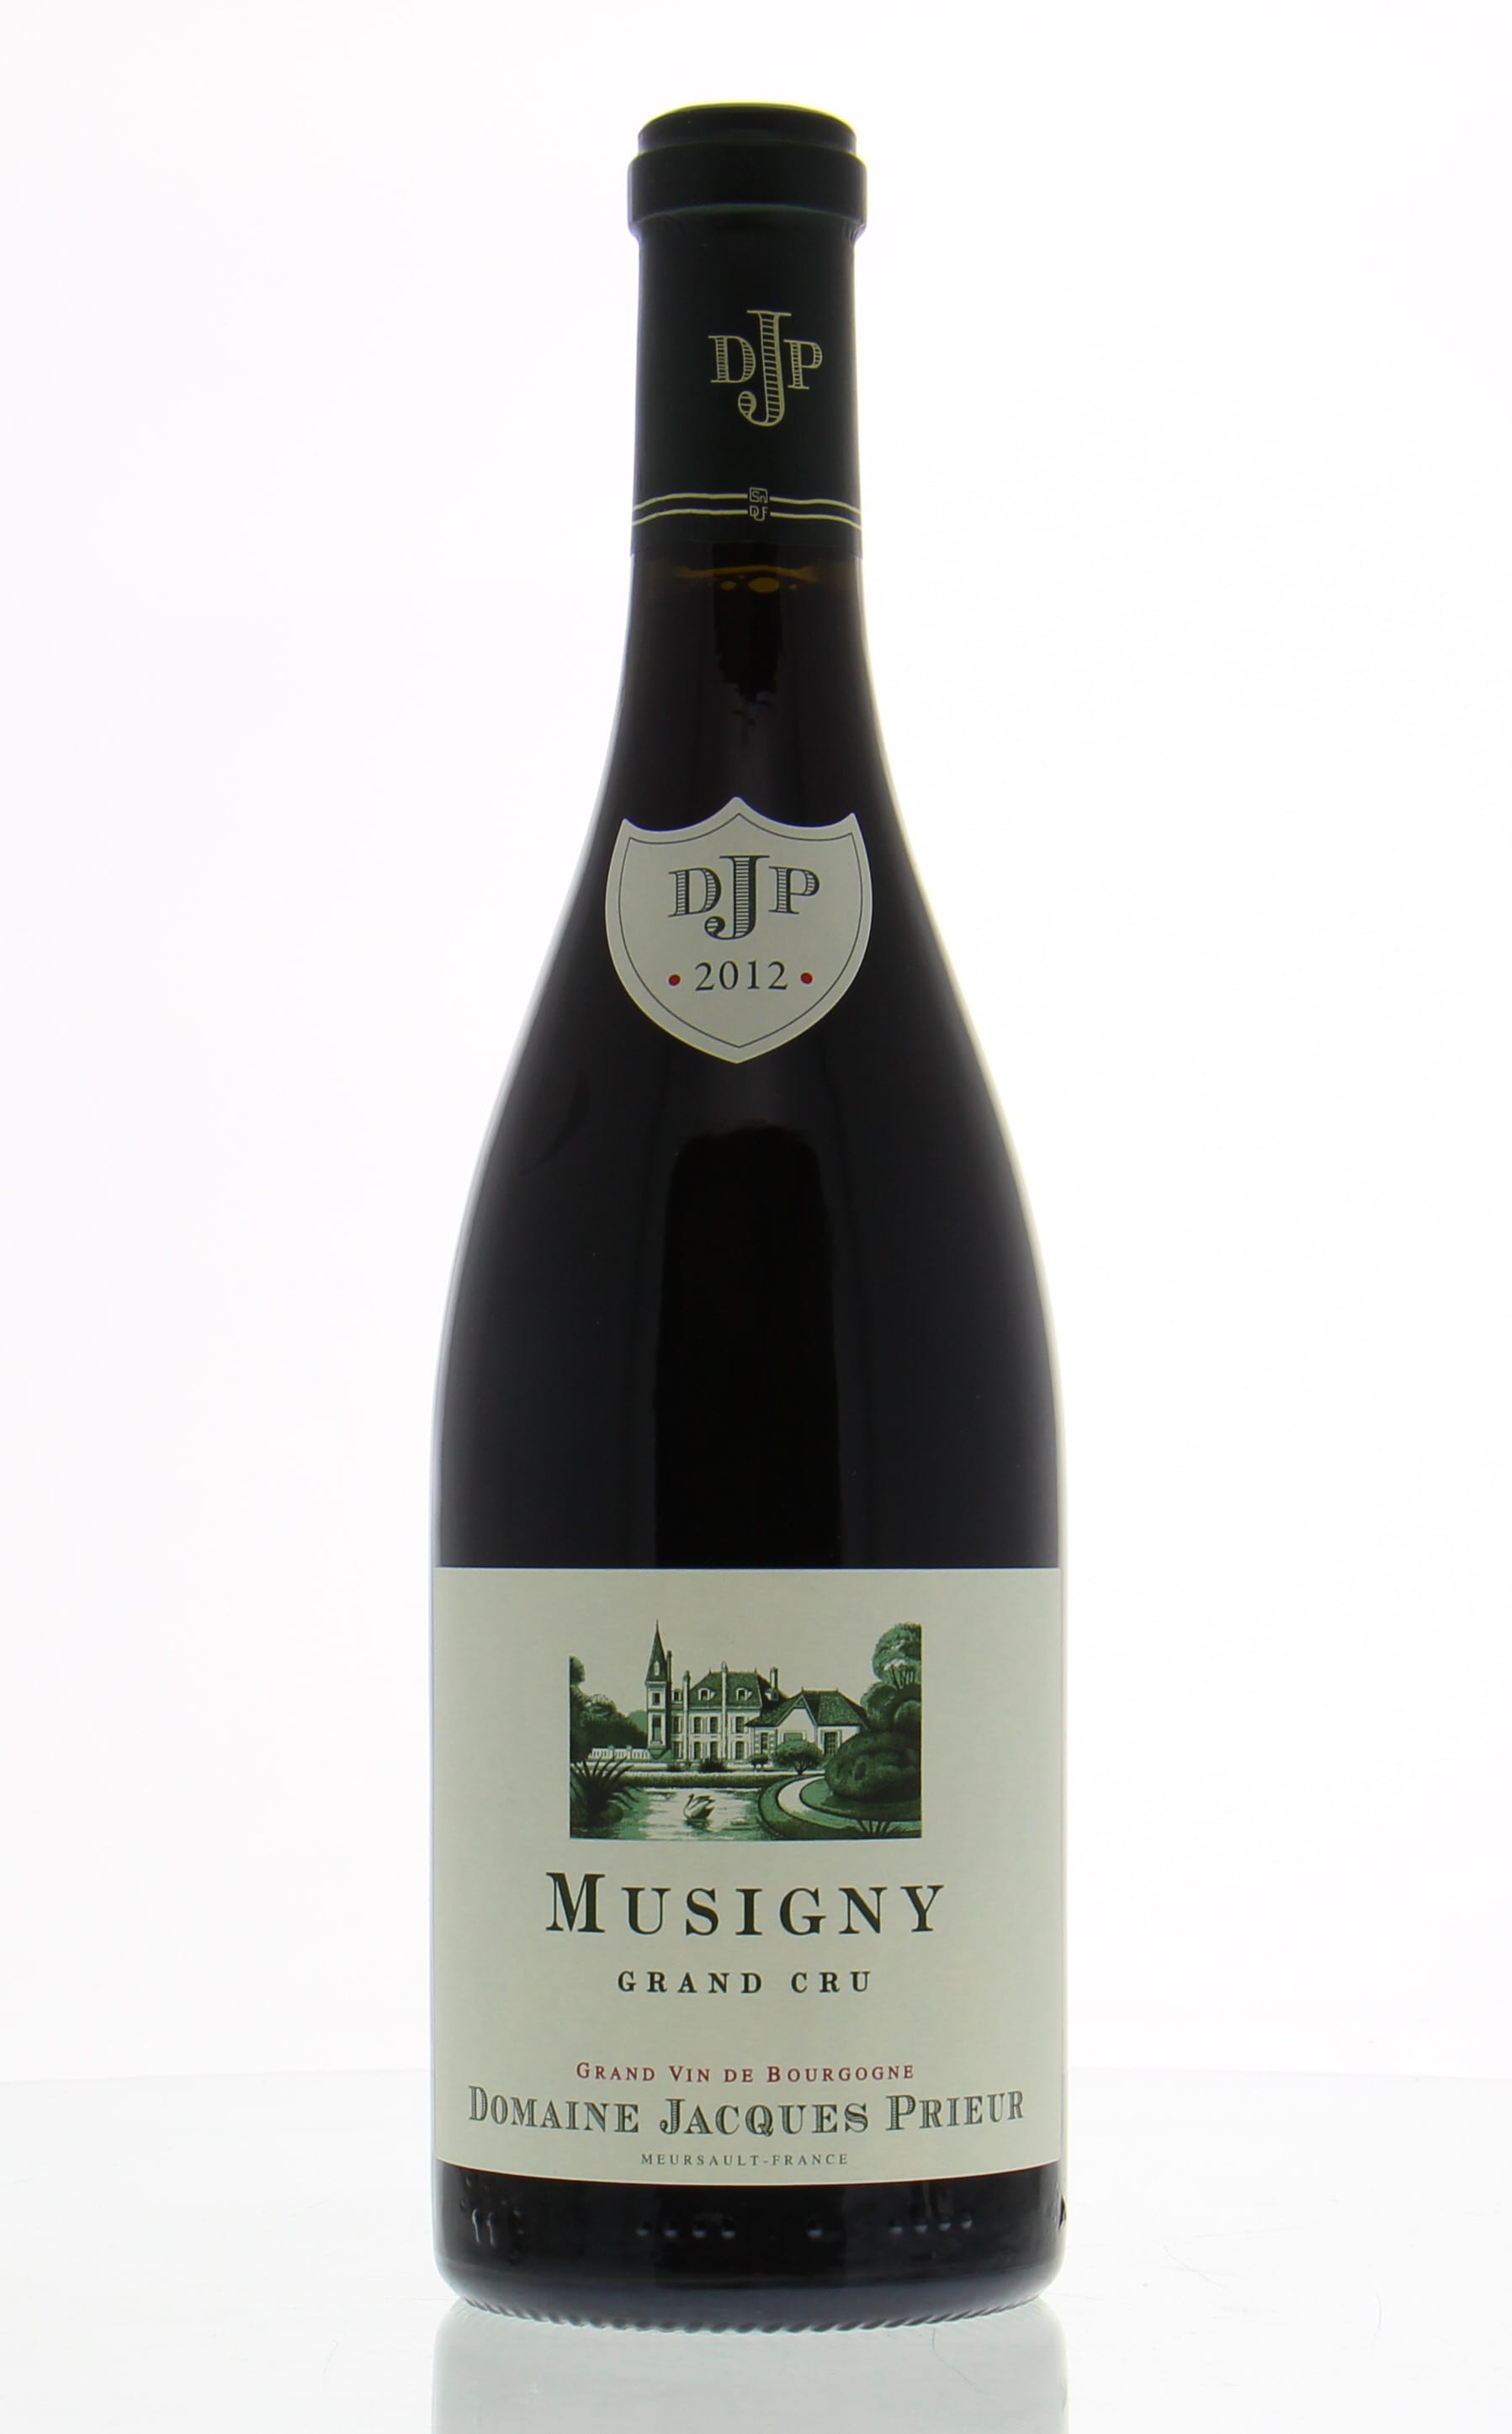 Domaine Jacques Prieur - Musigny 2012 Perfect